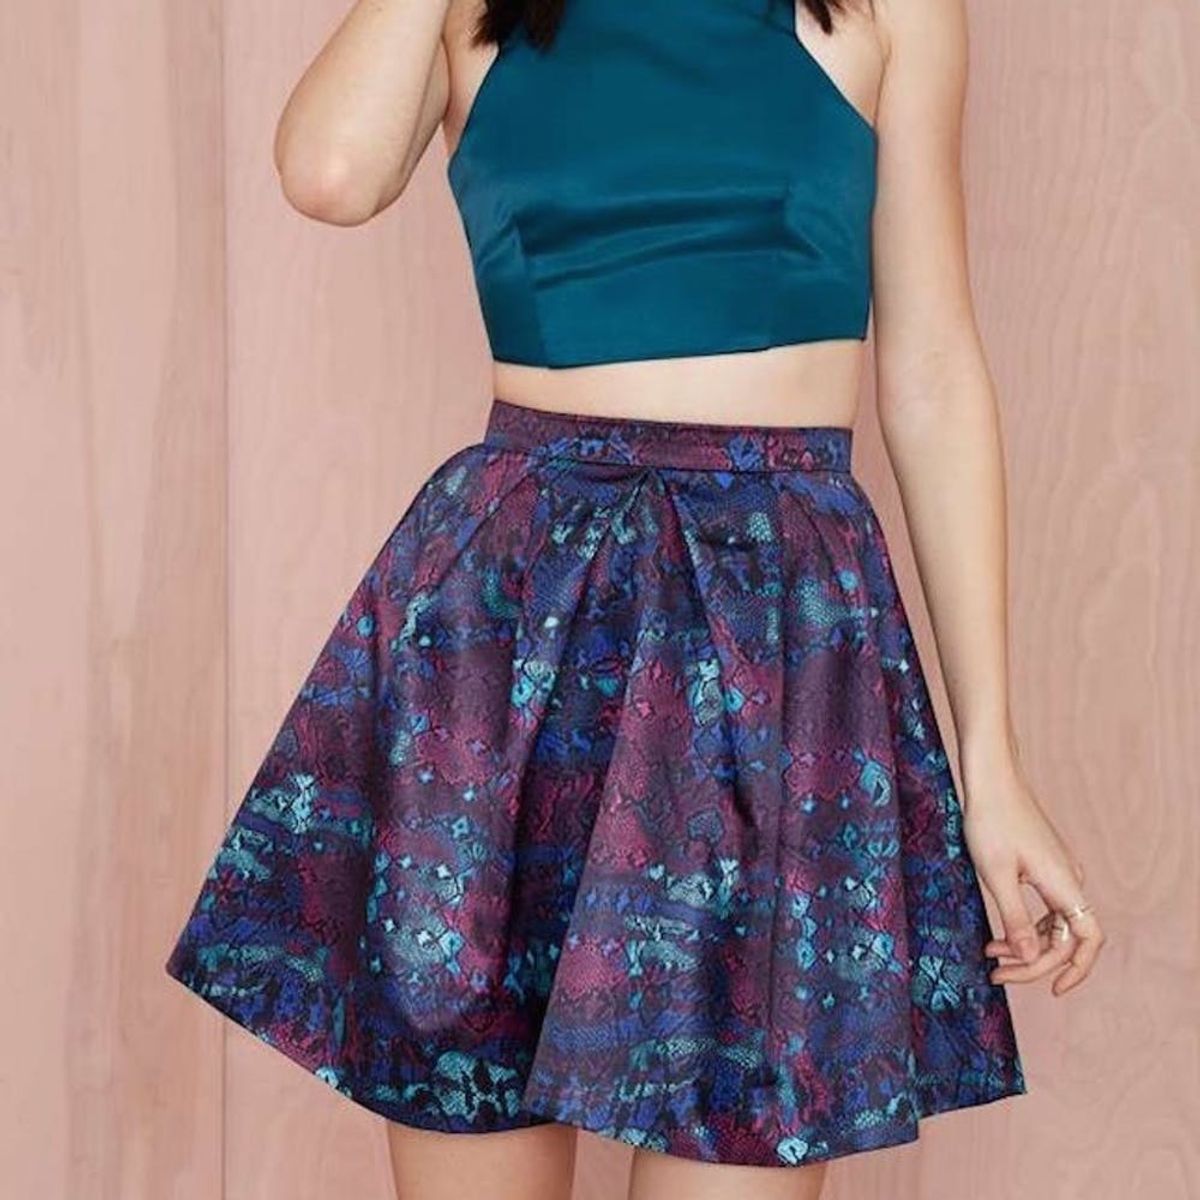 14 Circle Skirts You Need to Give a Twirl This Spring